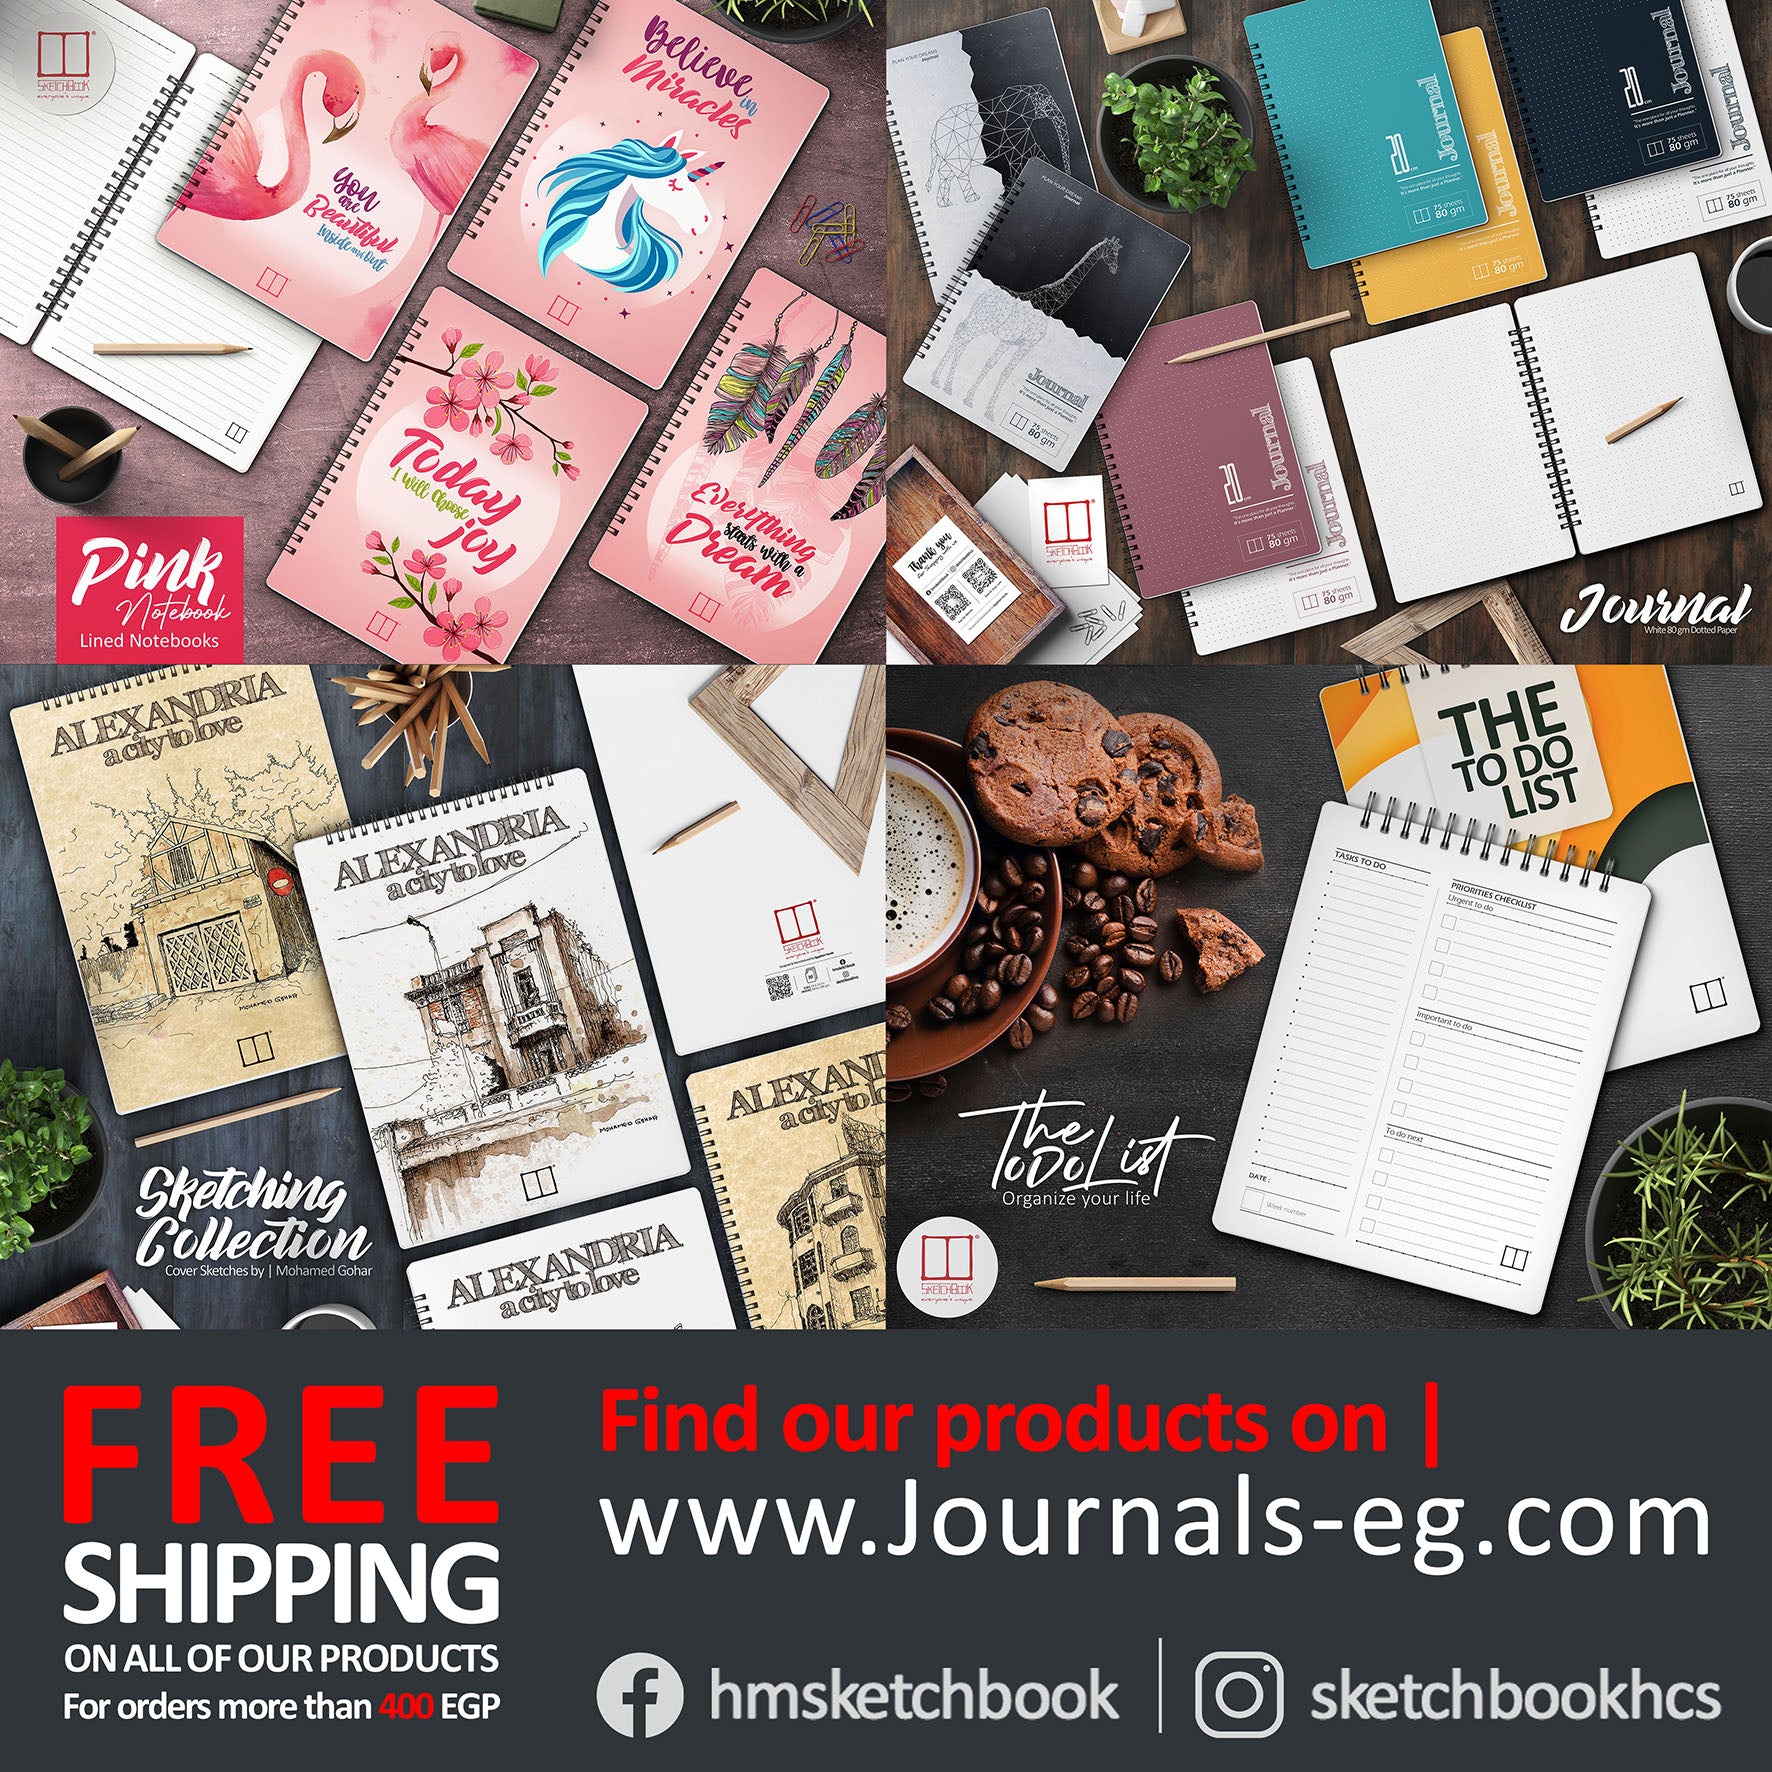 Offer - Free shipping